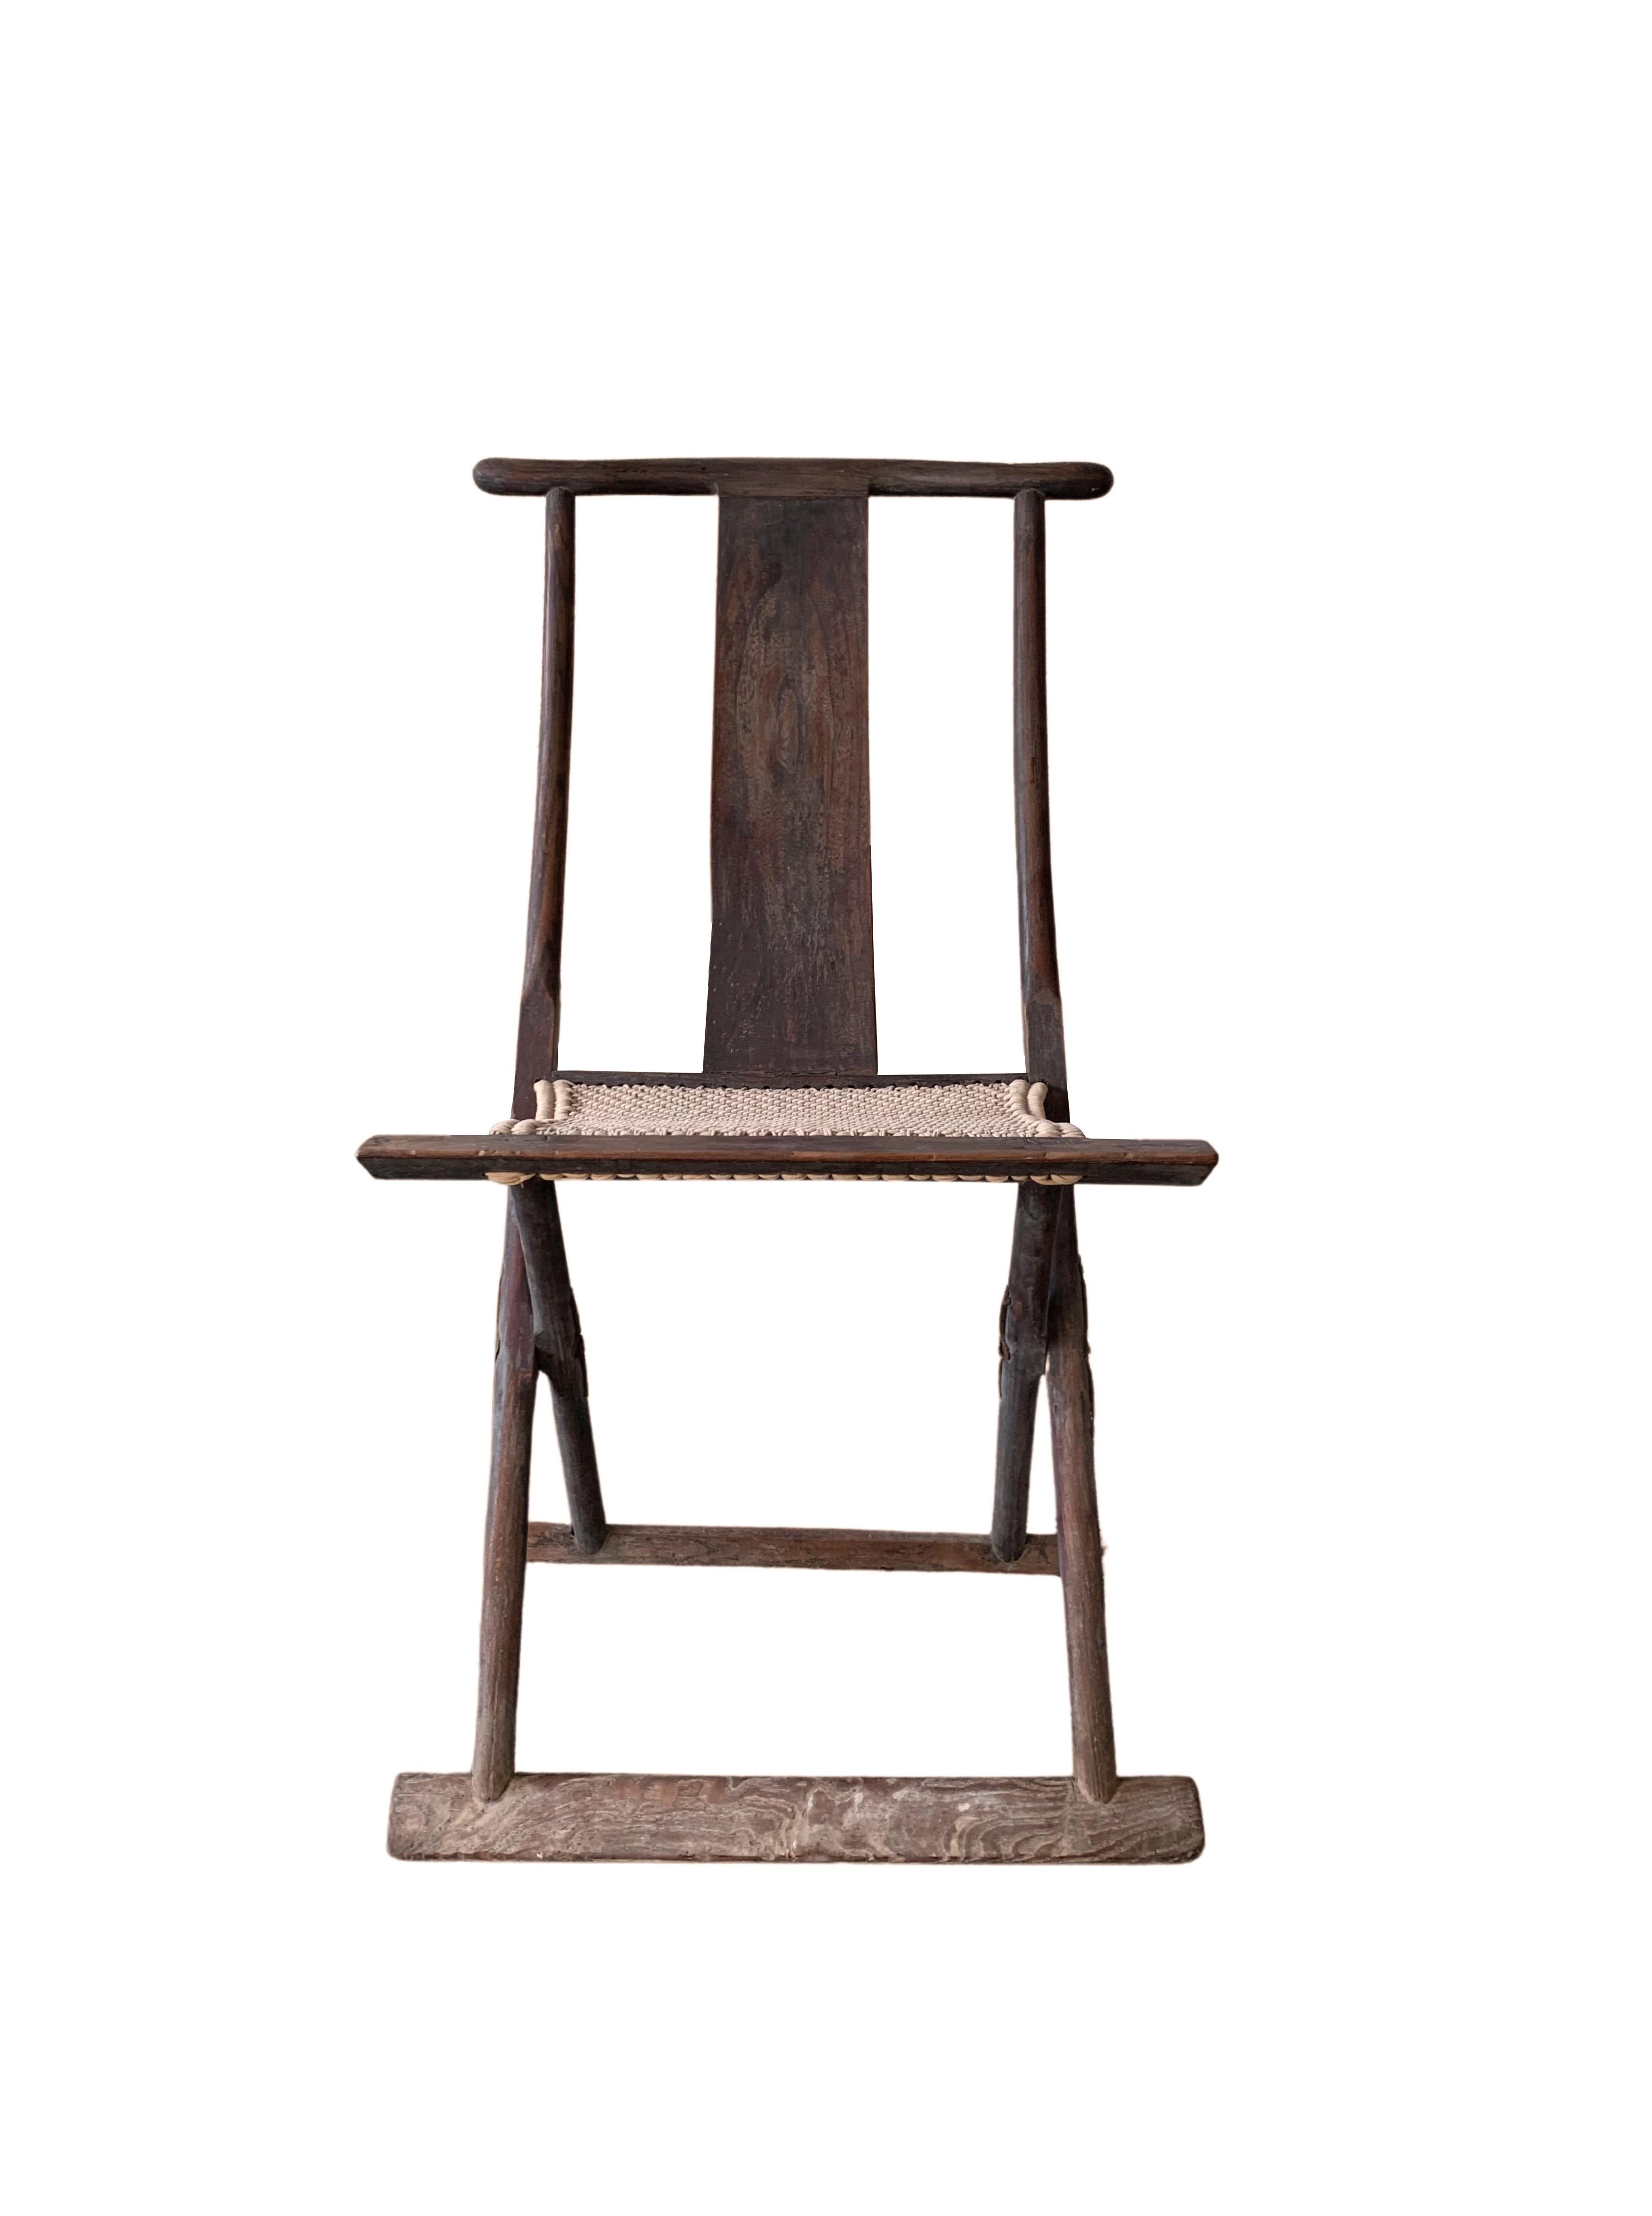 This folding chair from the early 20th Century was once used by Chinese Travellers. The seat is crafted from woven fabric, this coupled with the backrest makes for a comfortable chair. Its elegant, slender and minimal design make it the perfect